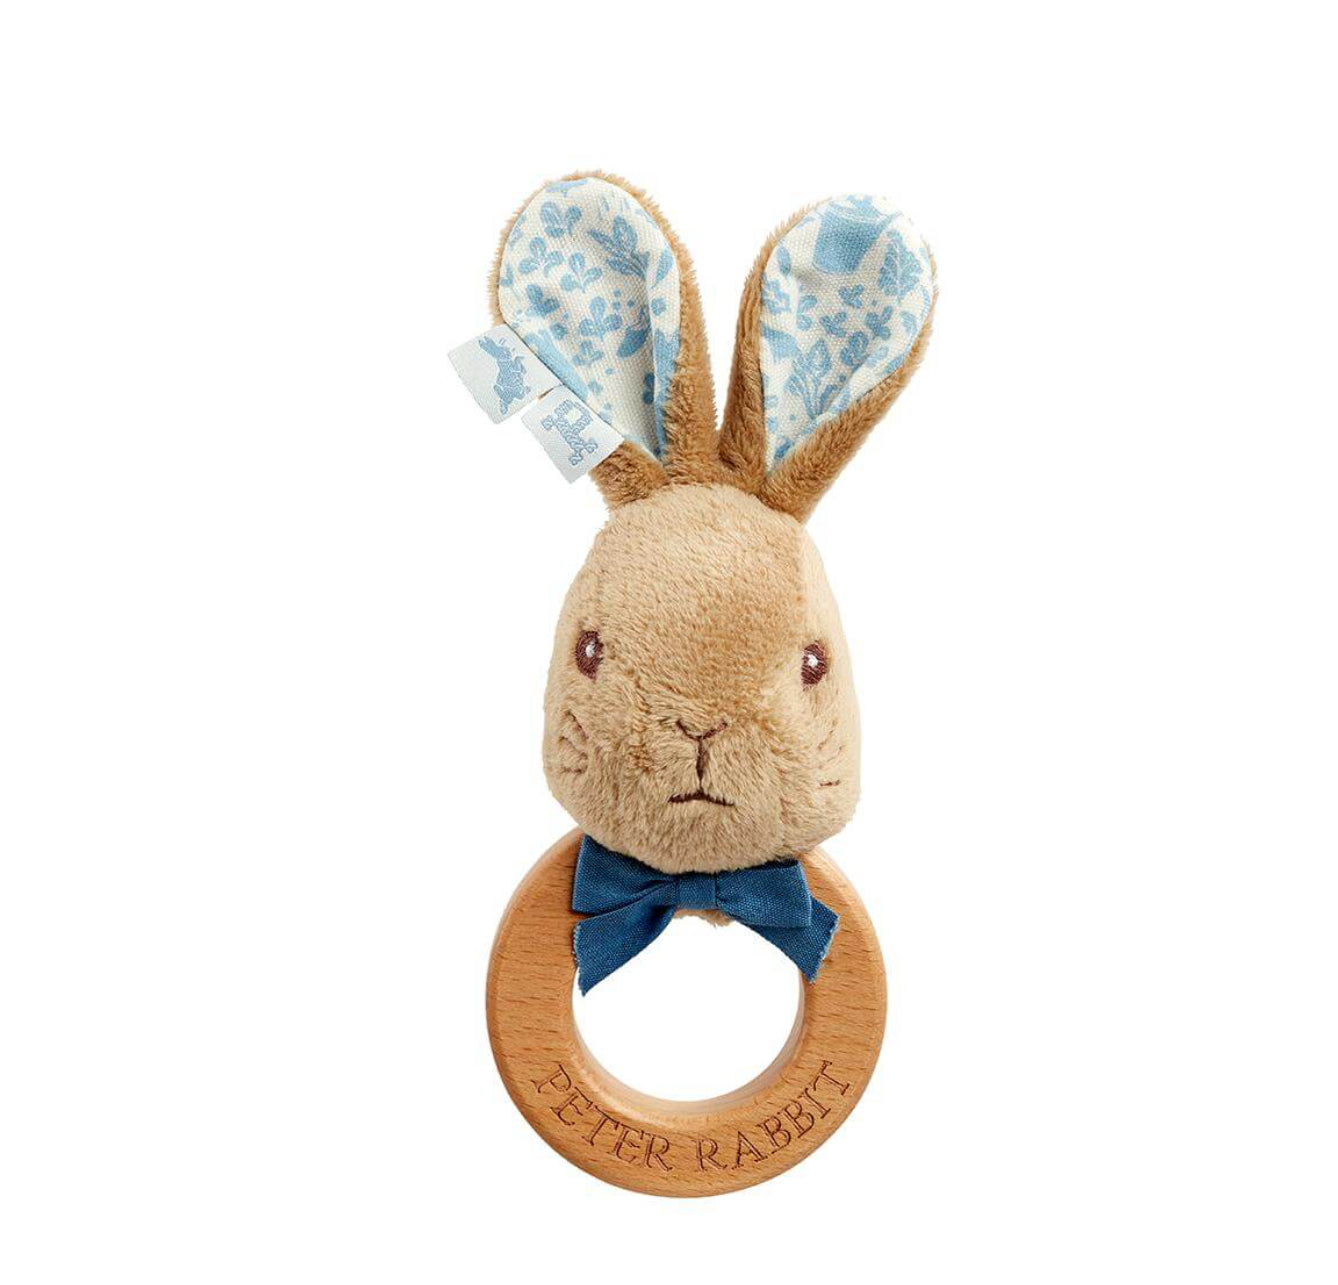 Peter Rabbit Deluxe Ring Rattle Toy Rainbow Toys Signature Collection